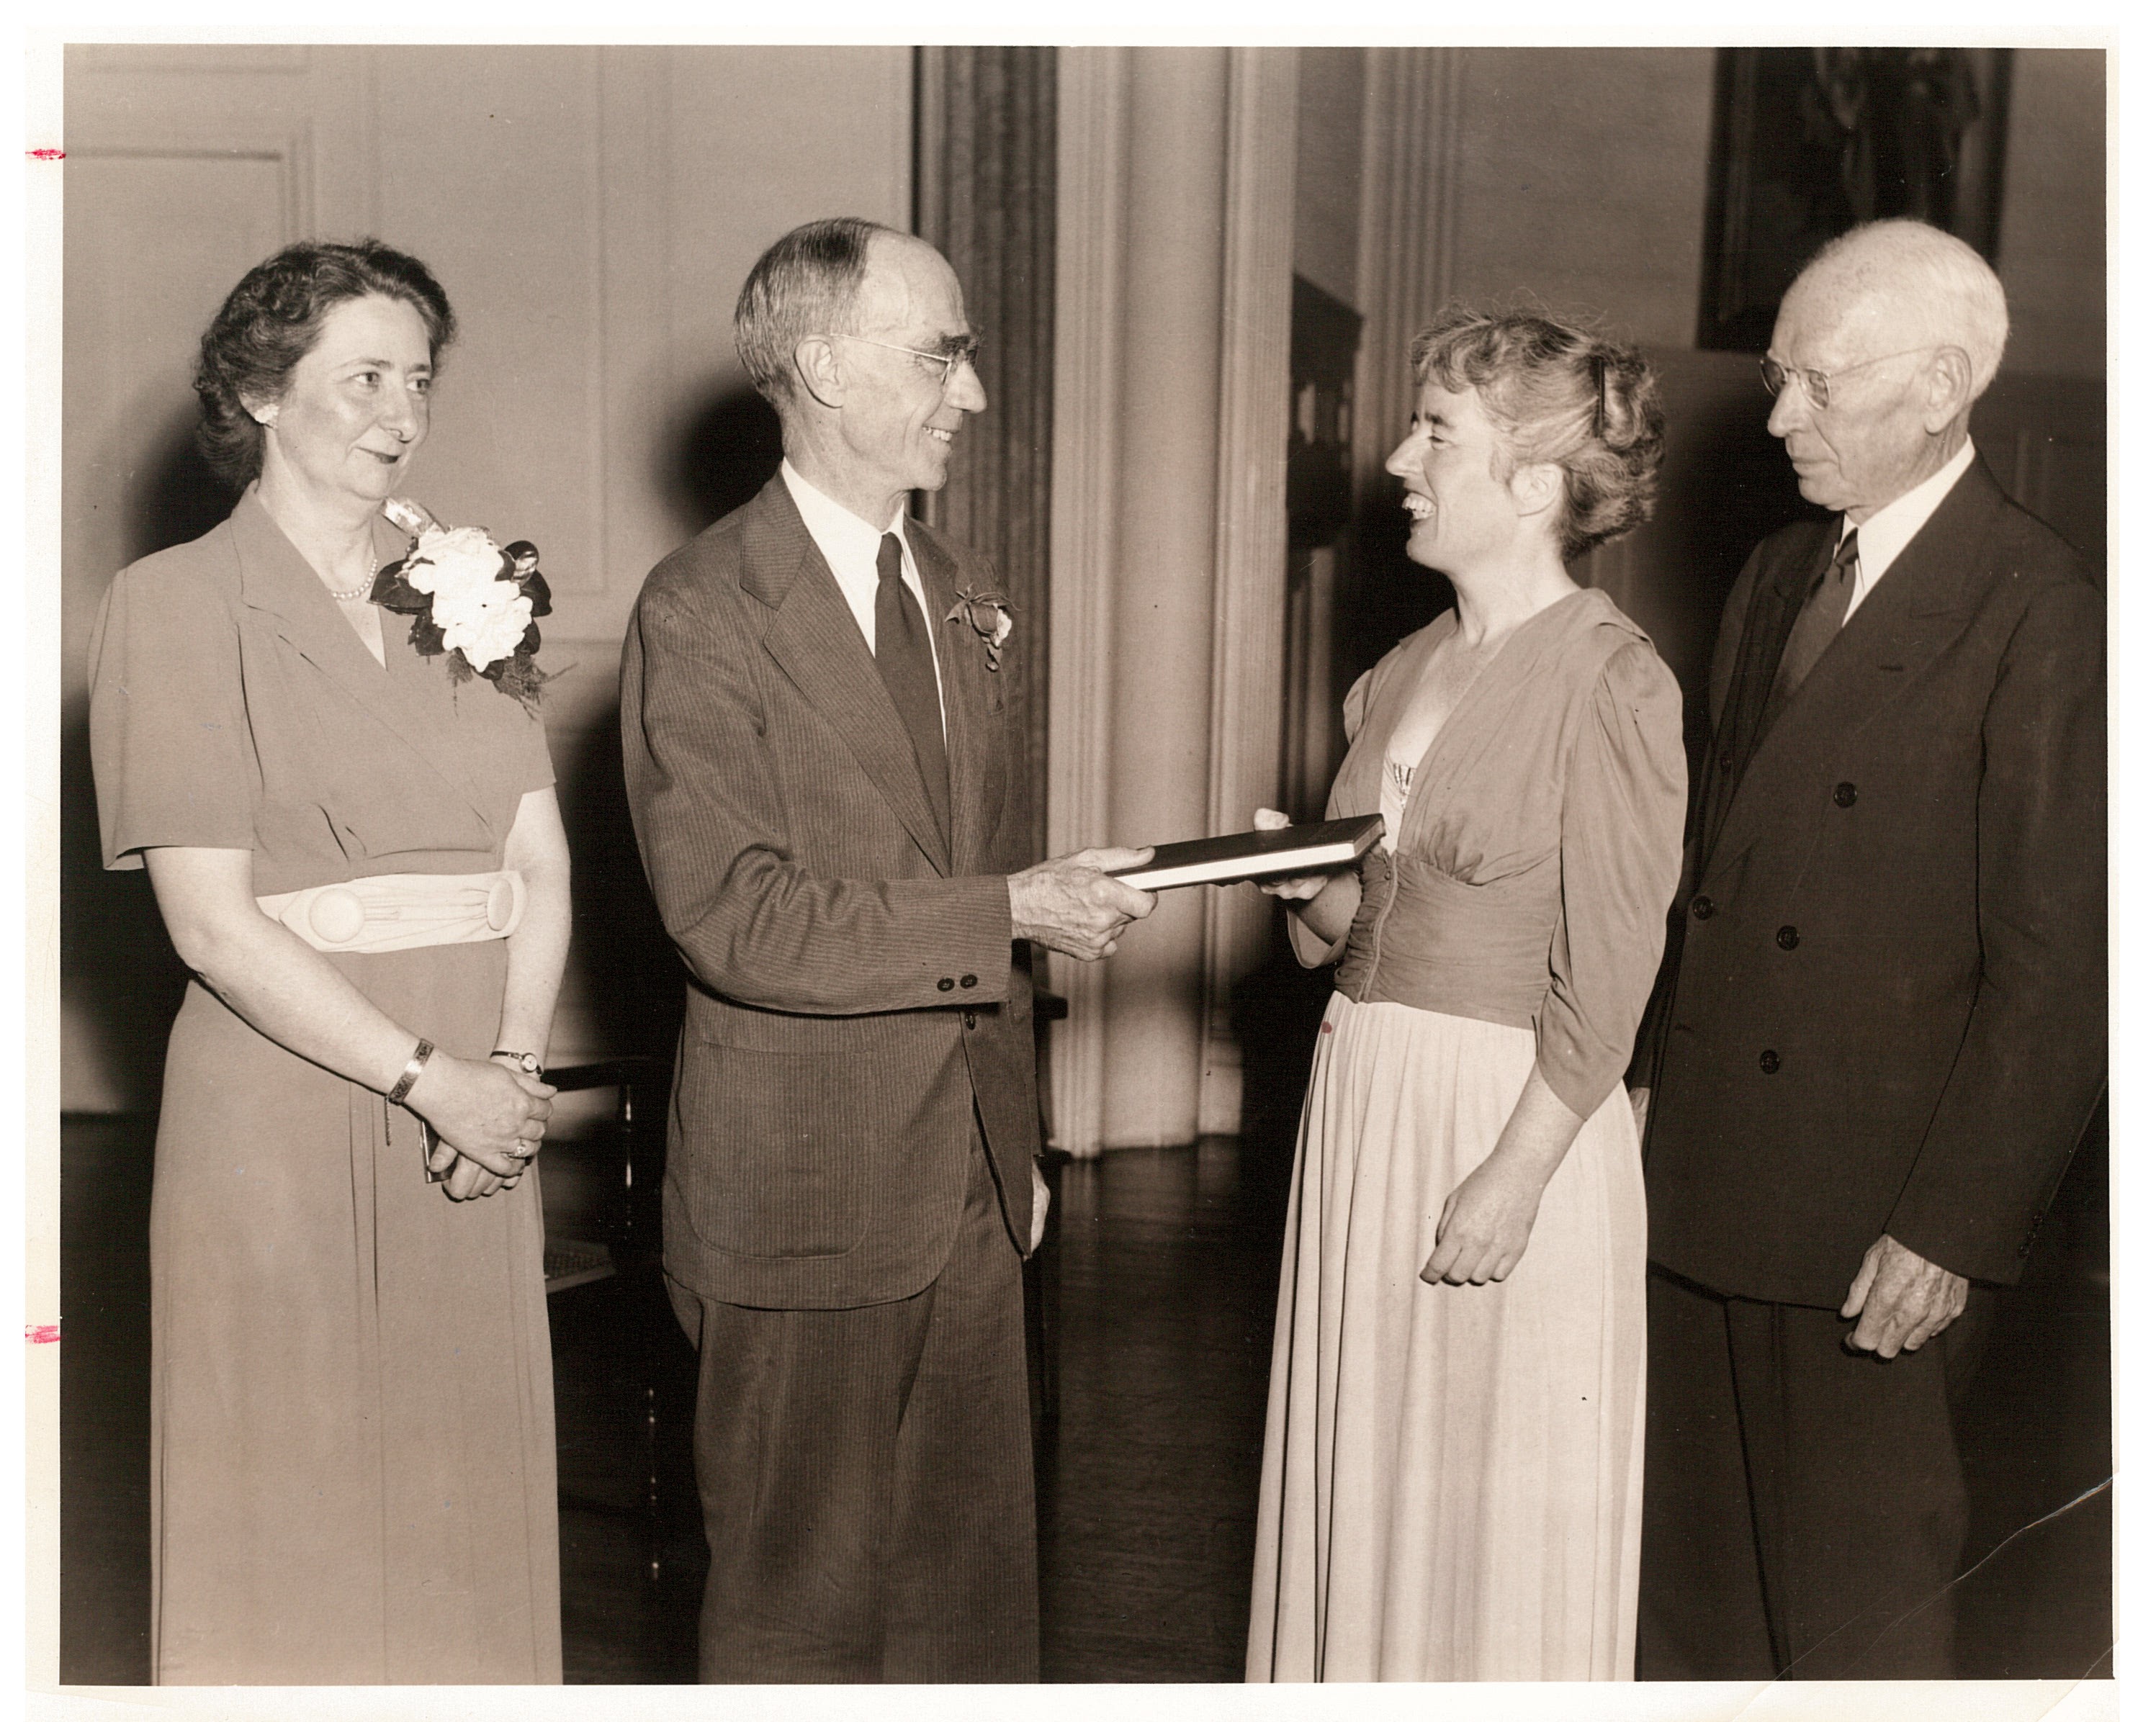 Black and white photo of four people. On the left is someone in a dress, then Everett Kimball handing a diploma to another person in a dress.